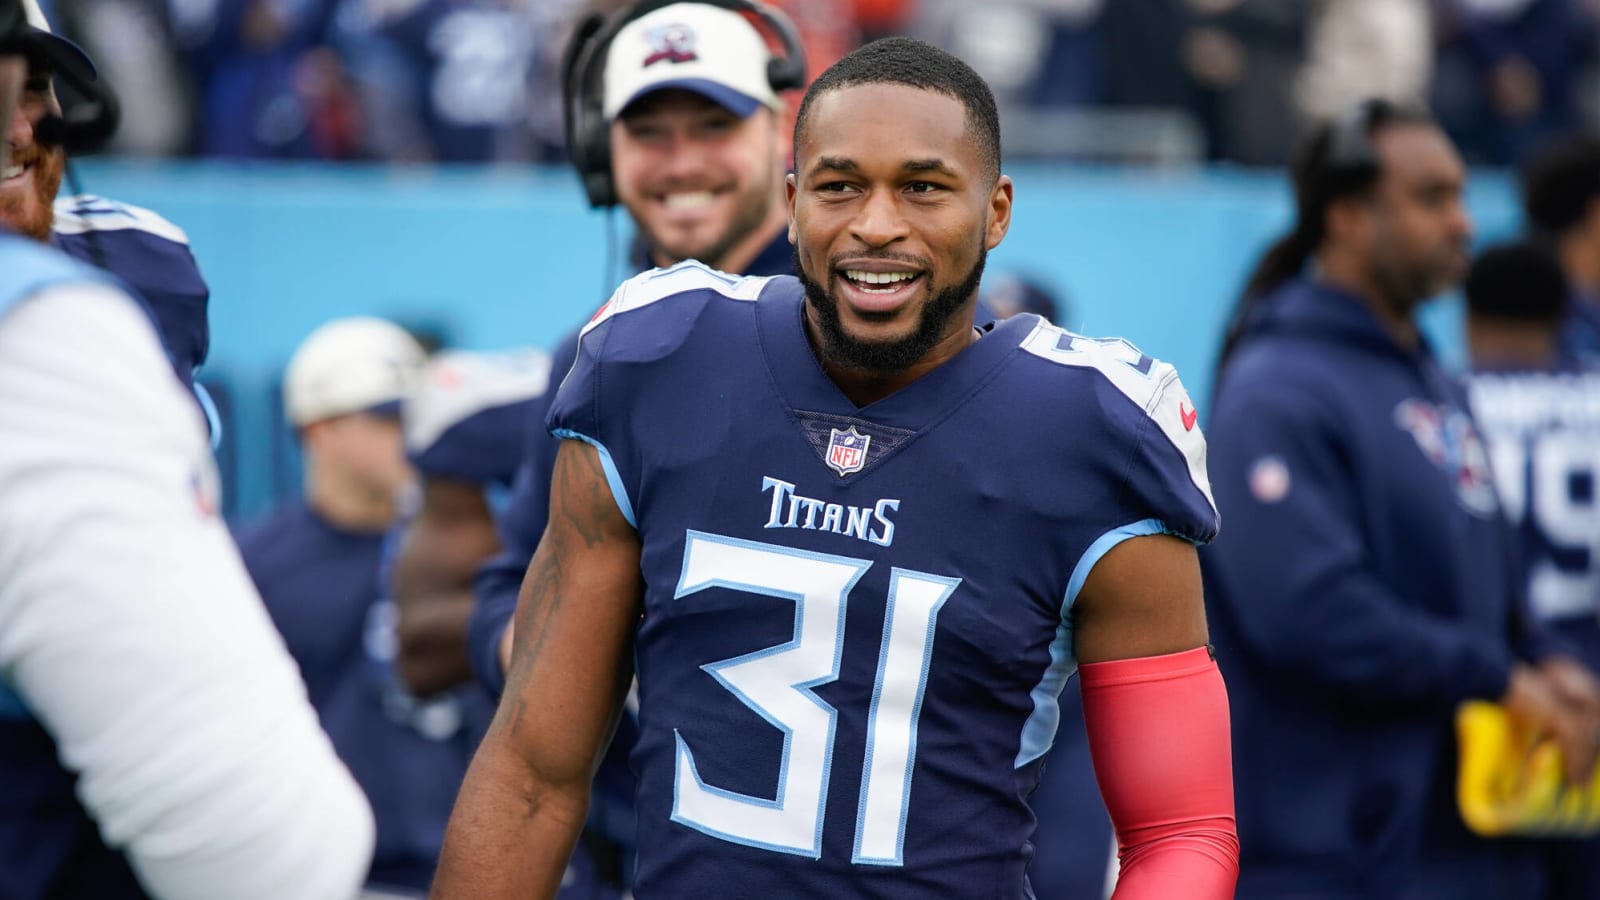 Kevin Byard in a good place with Titans